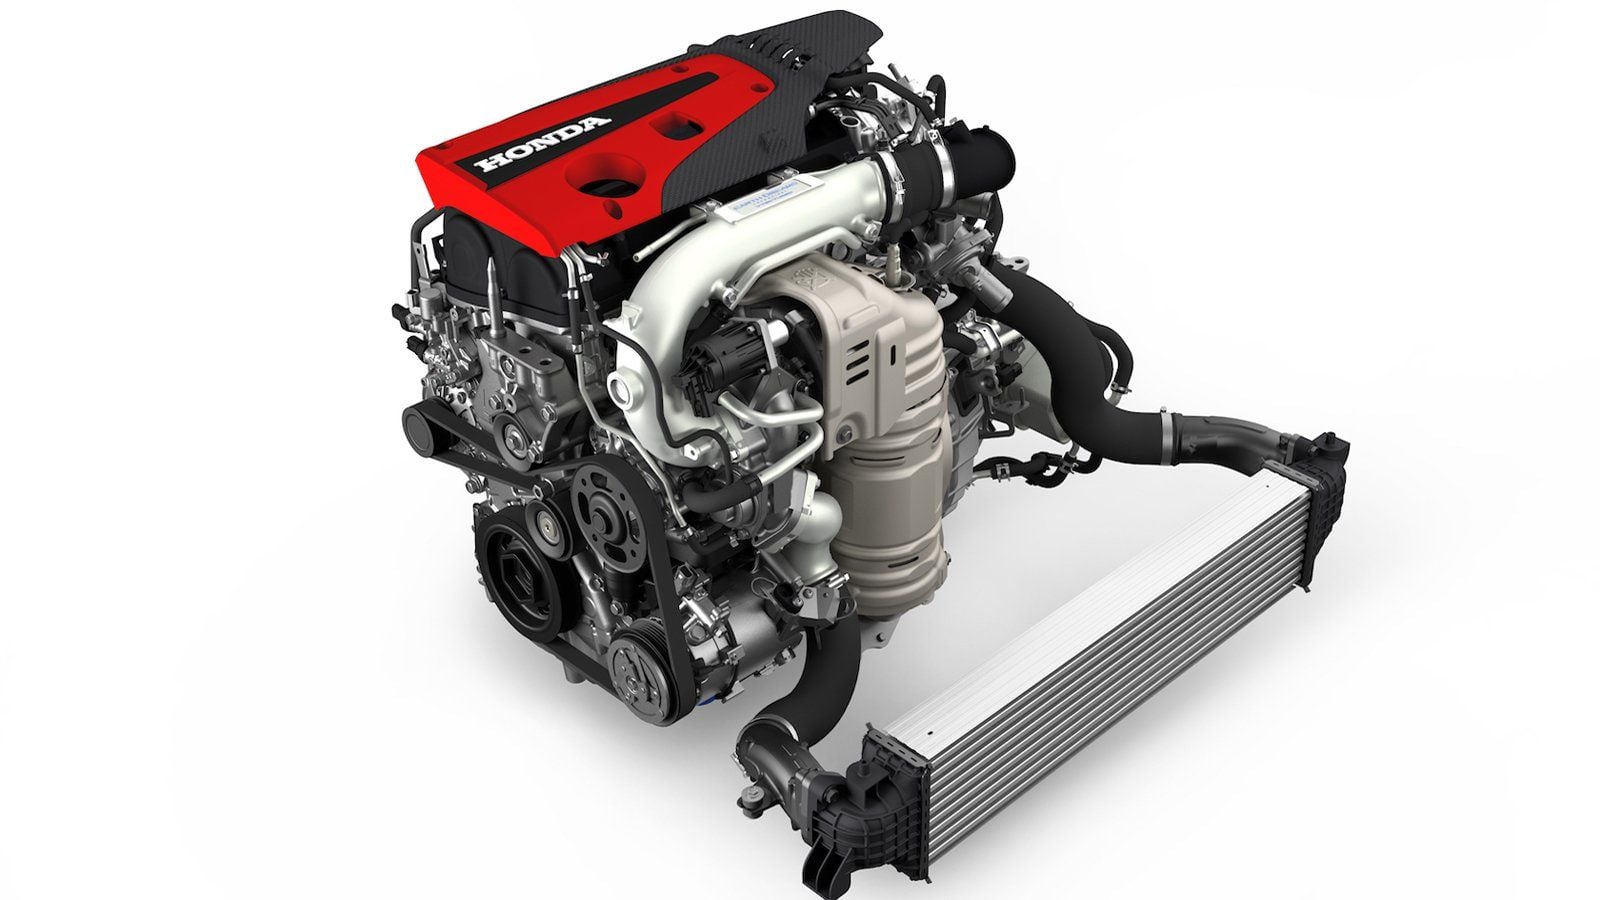 Civic Type R Engine Now Available as a Crate Motor S2KI